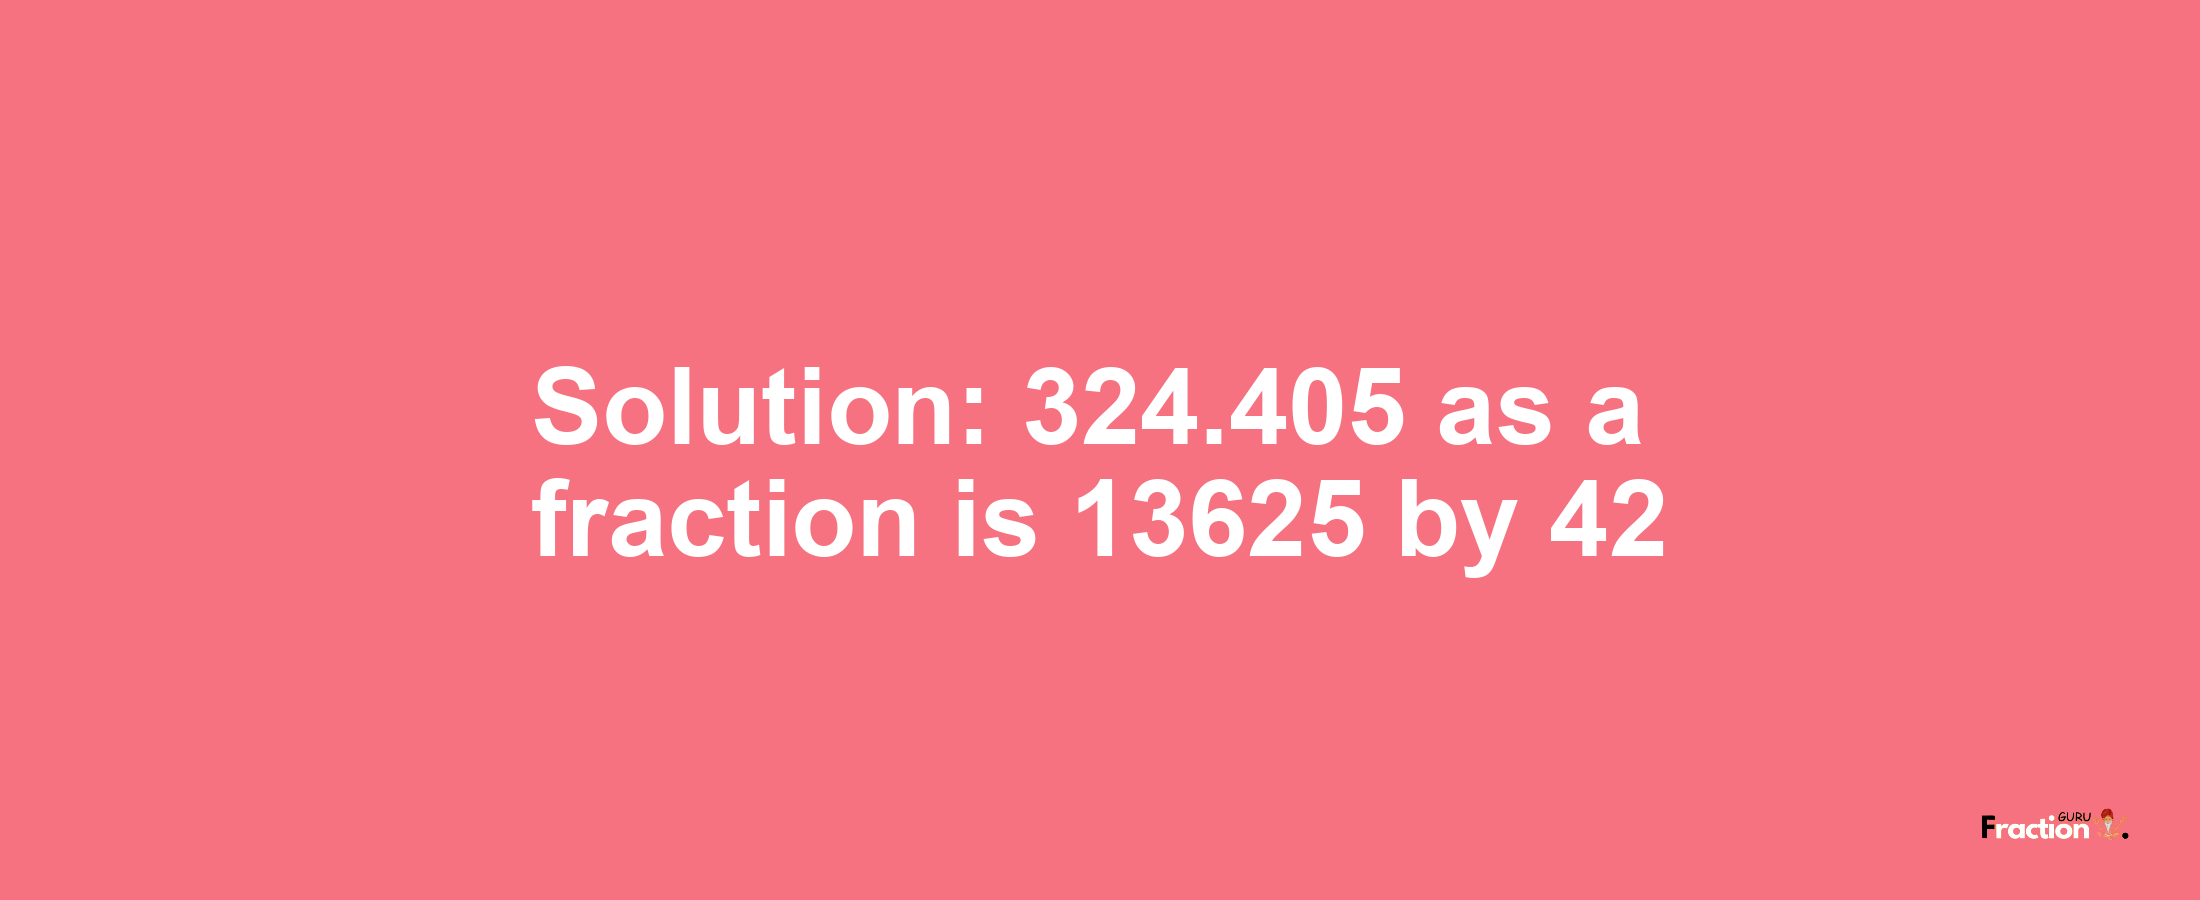 Solution:324.405 as a fraction is 13625/42